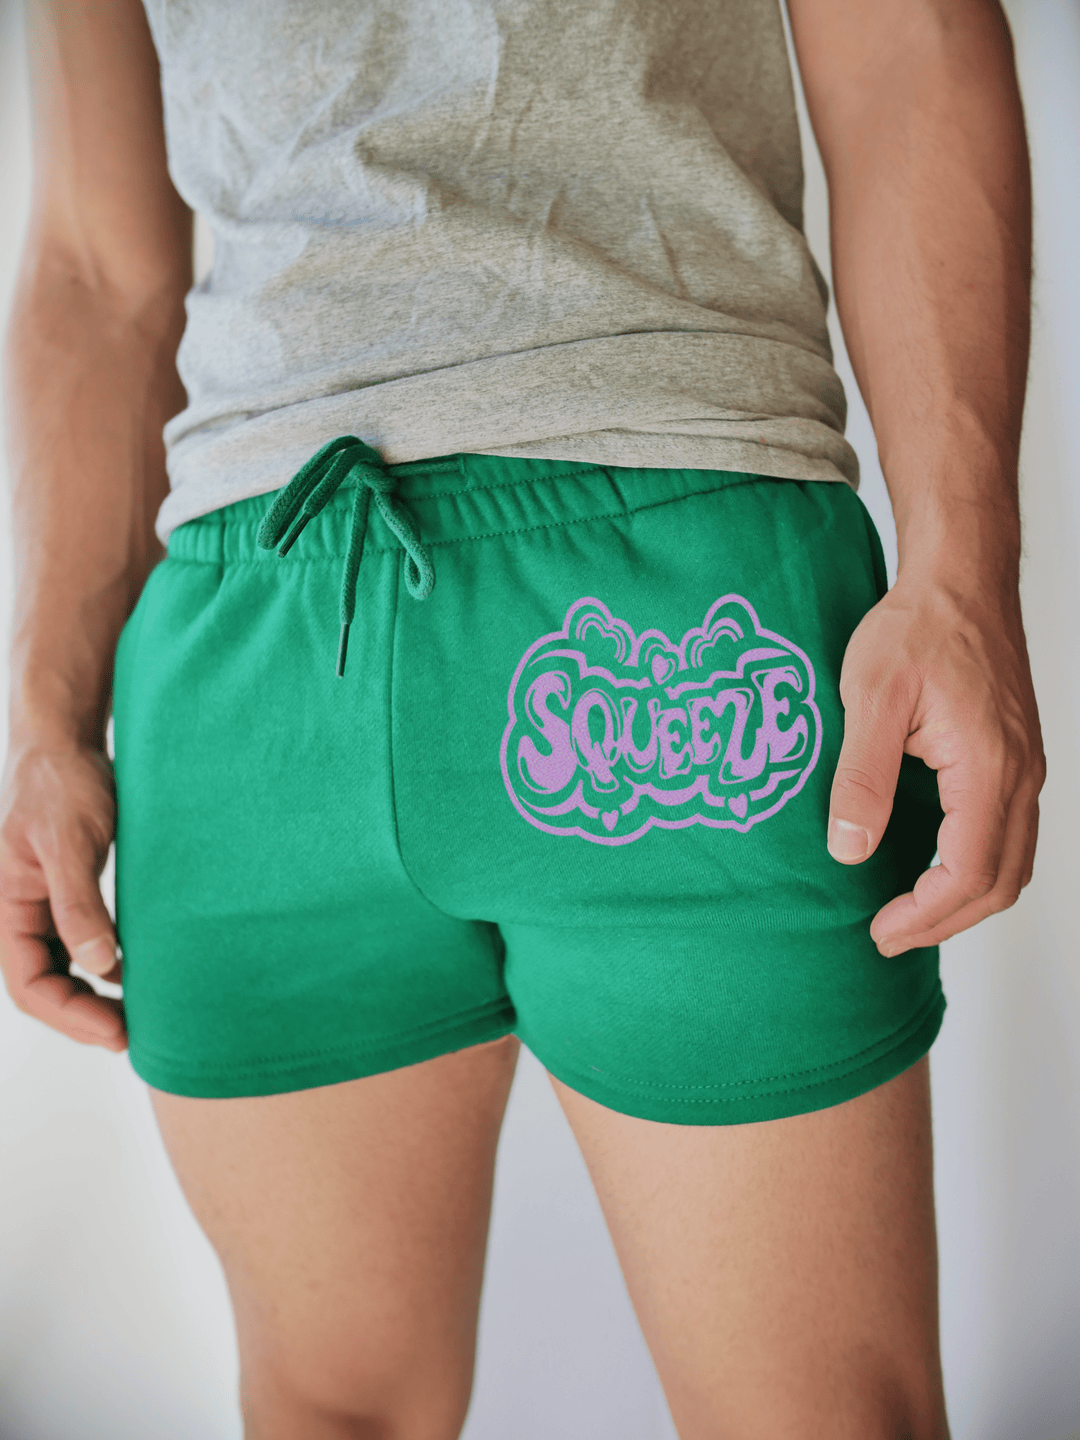 PixelThat Punderwear Shorts Kelly Green / S / Front Squeeze Men's Gym Shorts